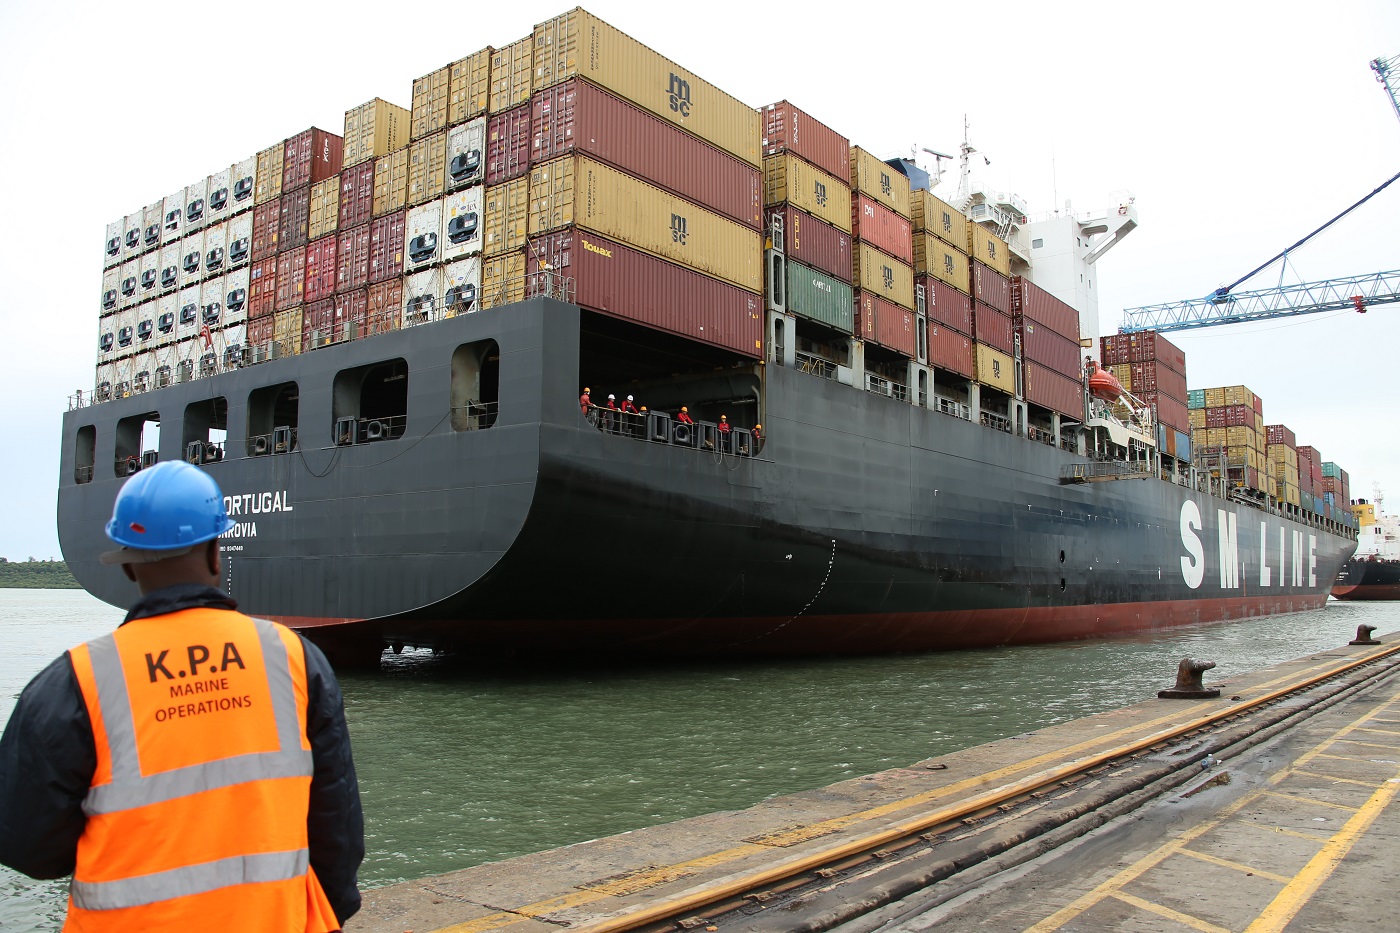 Kenya takes measures to improve efficiency and end delays at Mombasa port